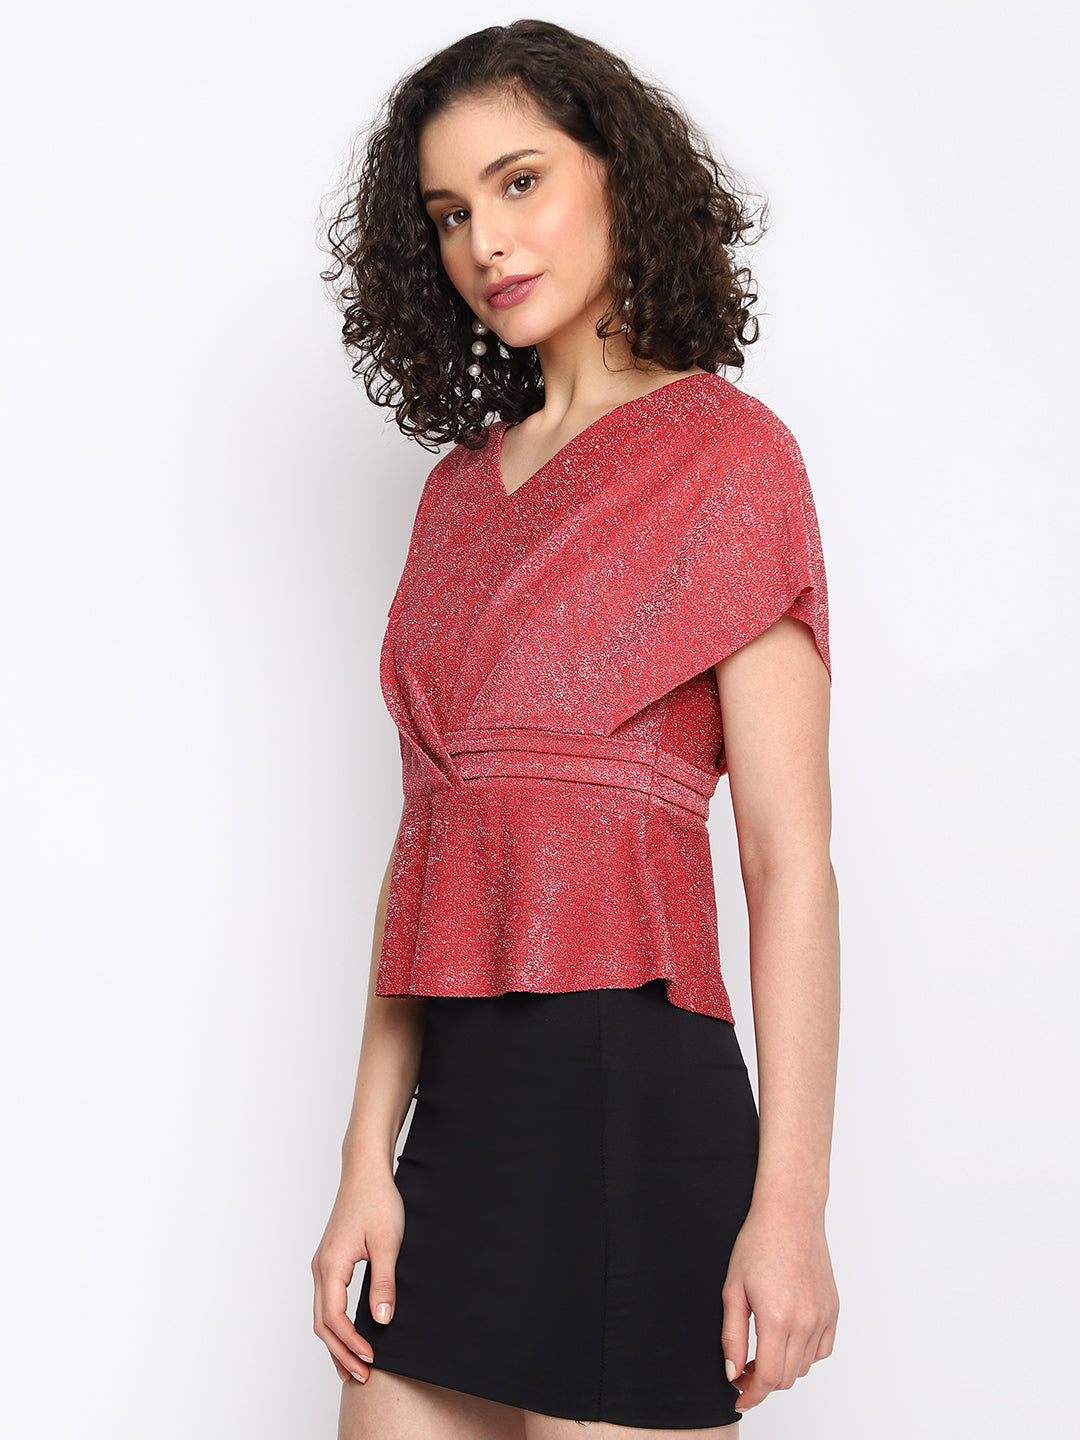 Rose Half Sleeve Solid Knit Top